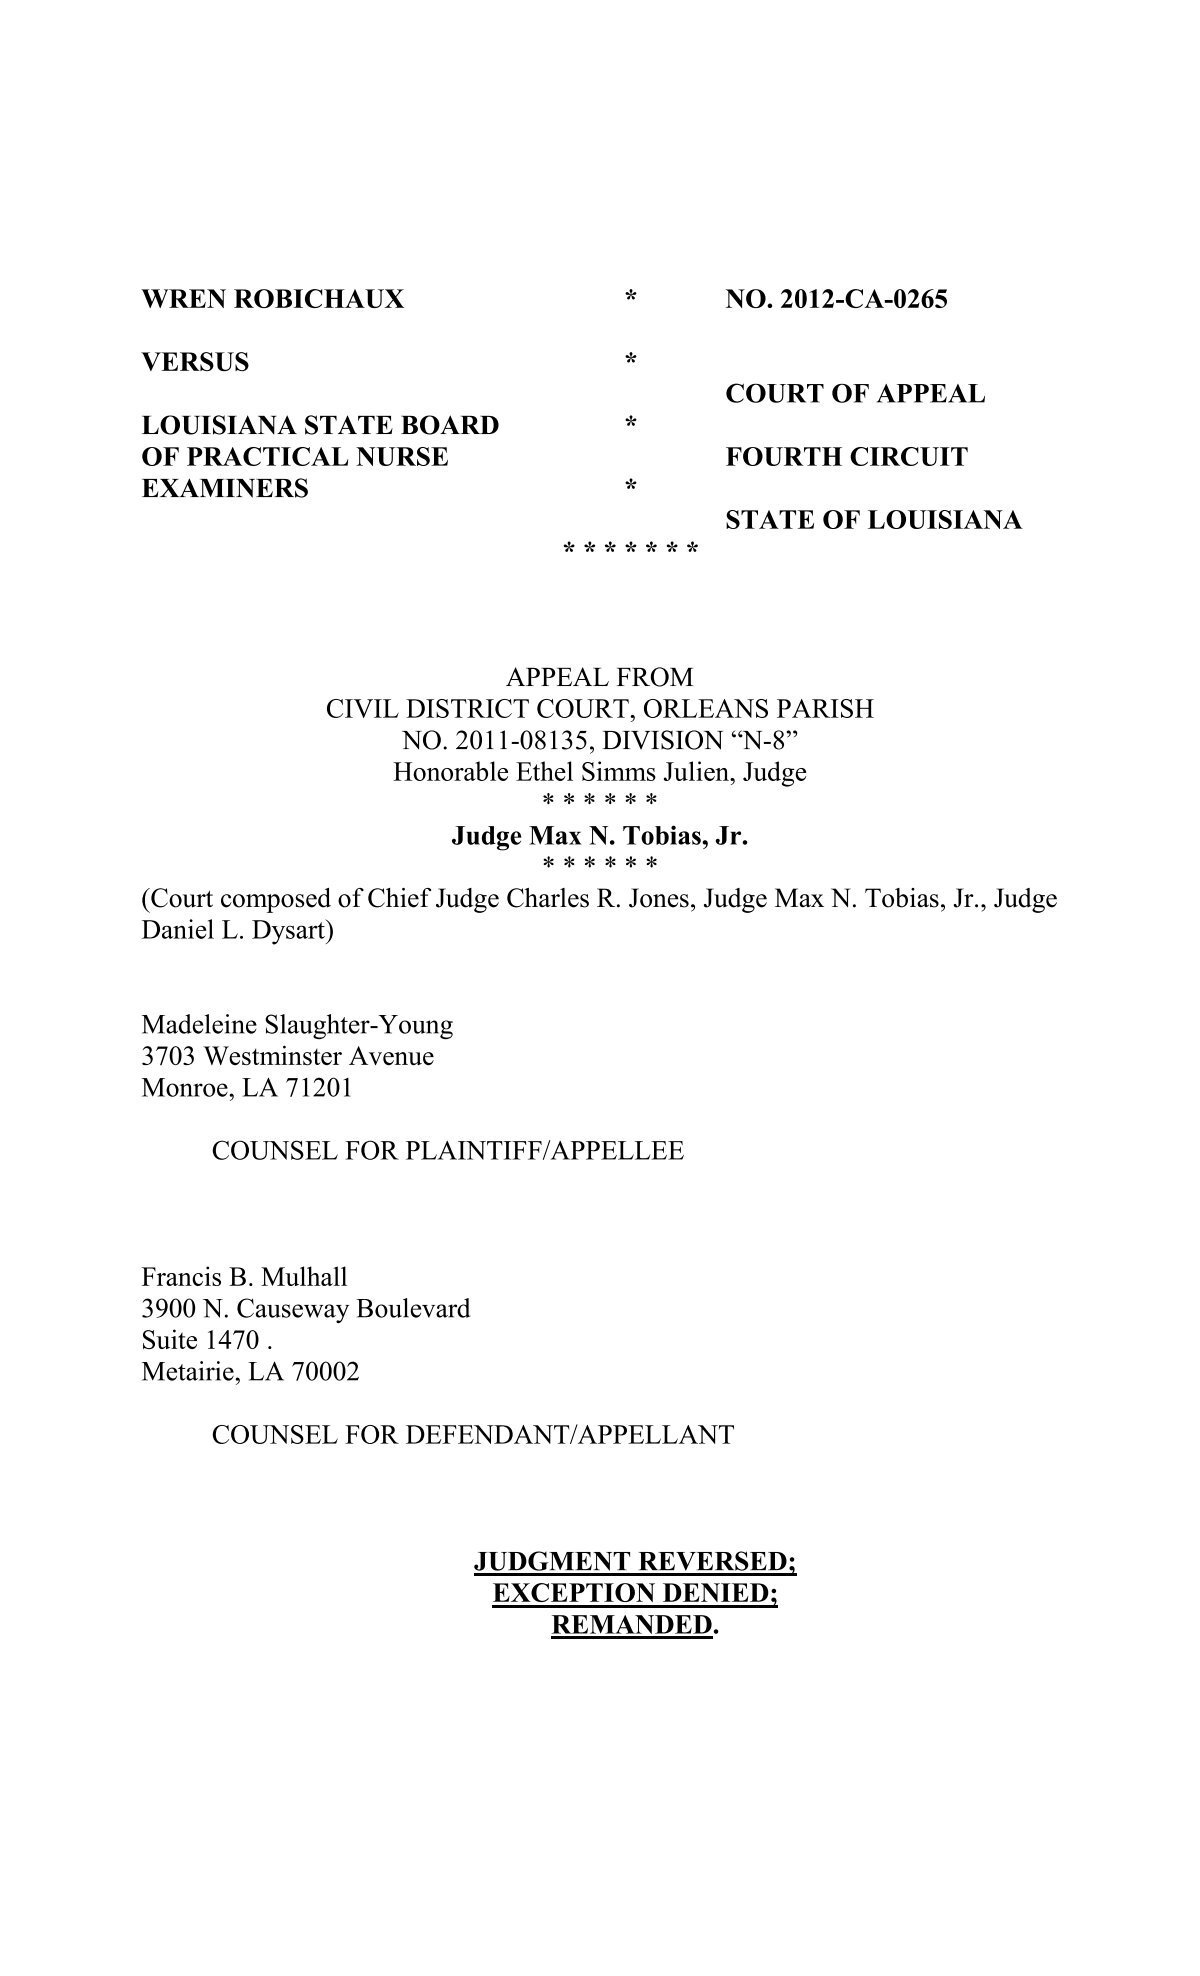 Document generated from the Louisiana Court of Appeal Fourth